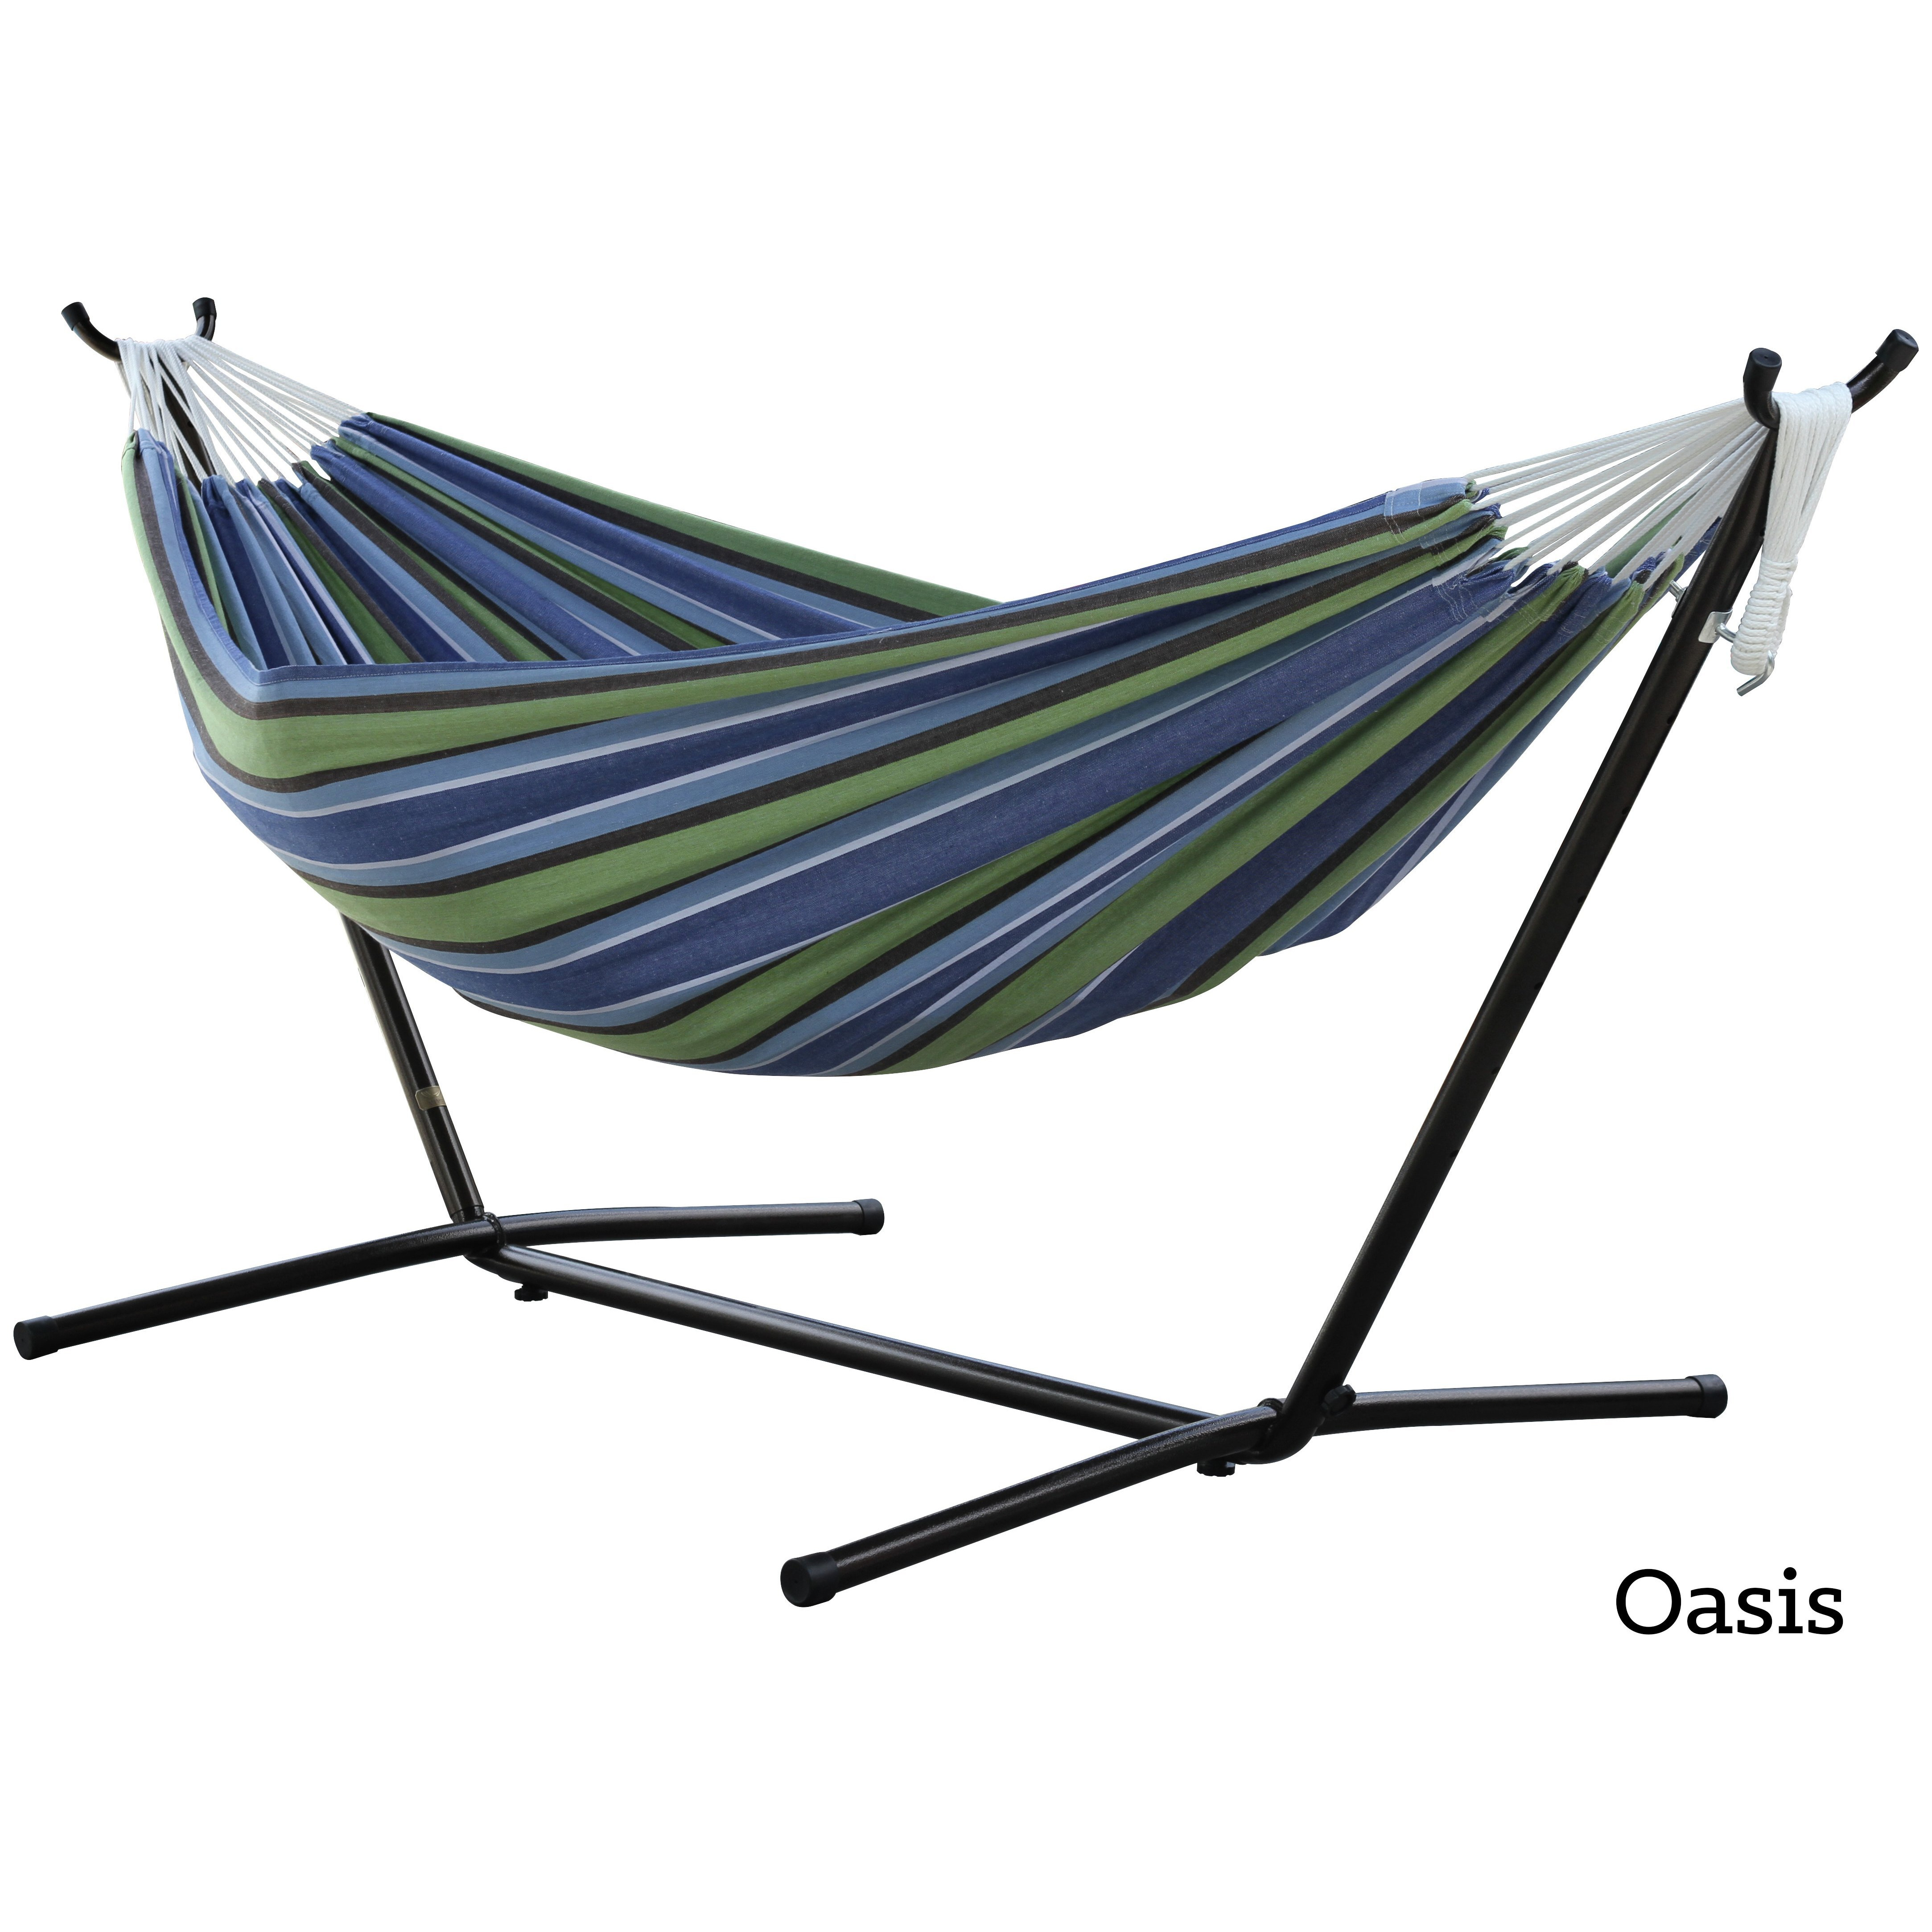 Vivere Oasis Double Hammock with Metal Stand - image 1